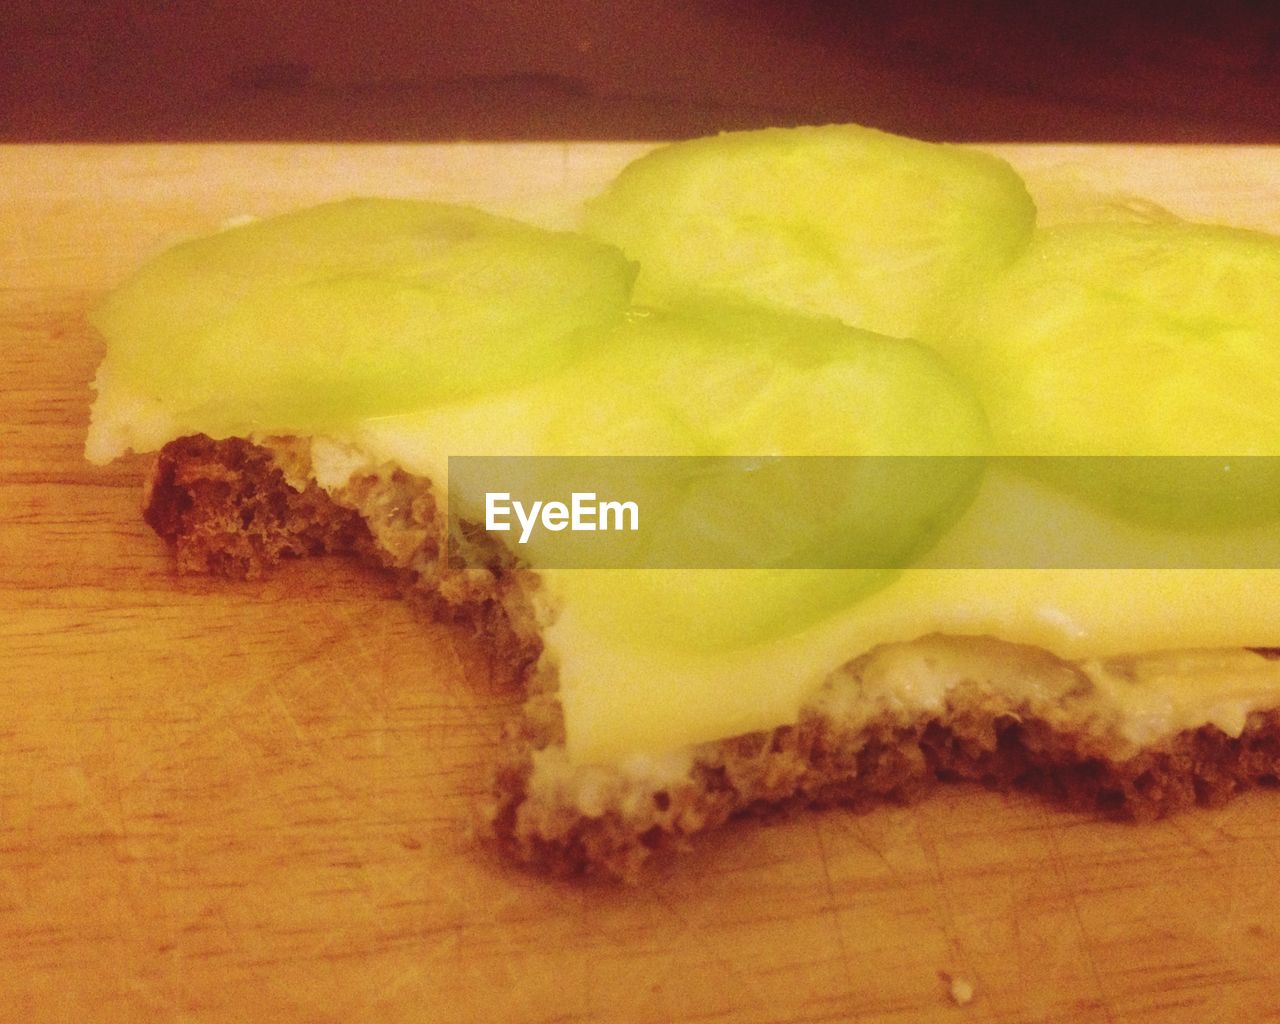 Cheese and cucumber sandwich with tooth marks